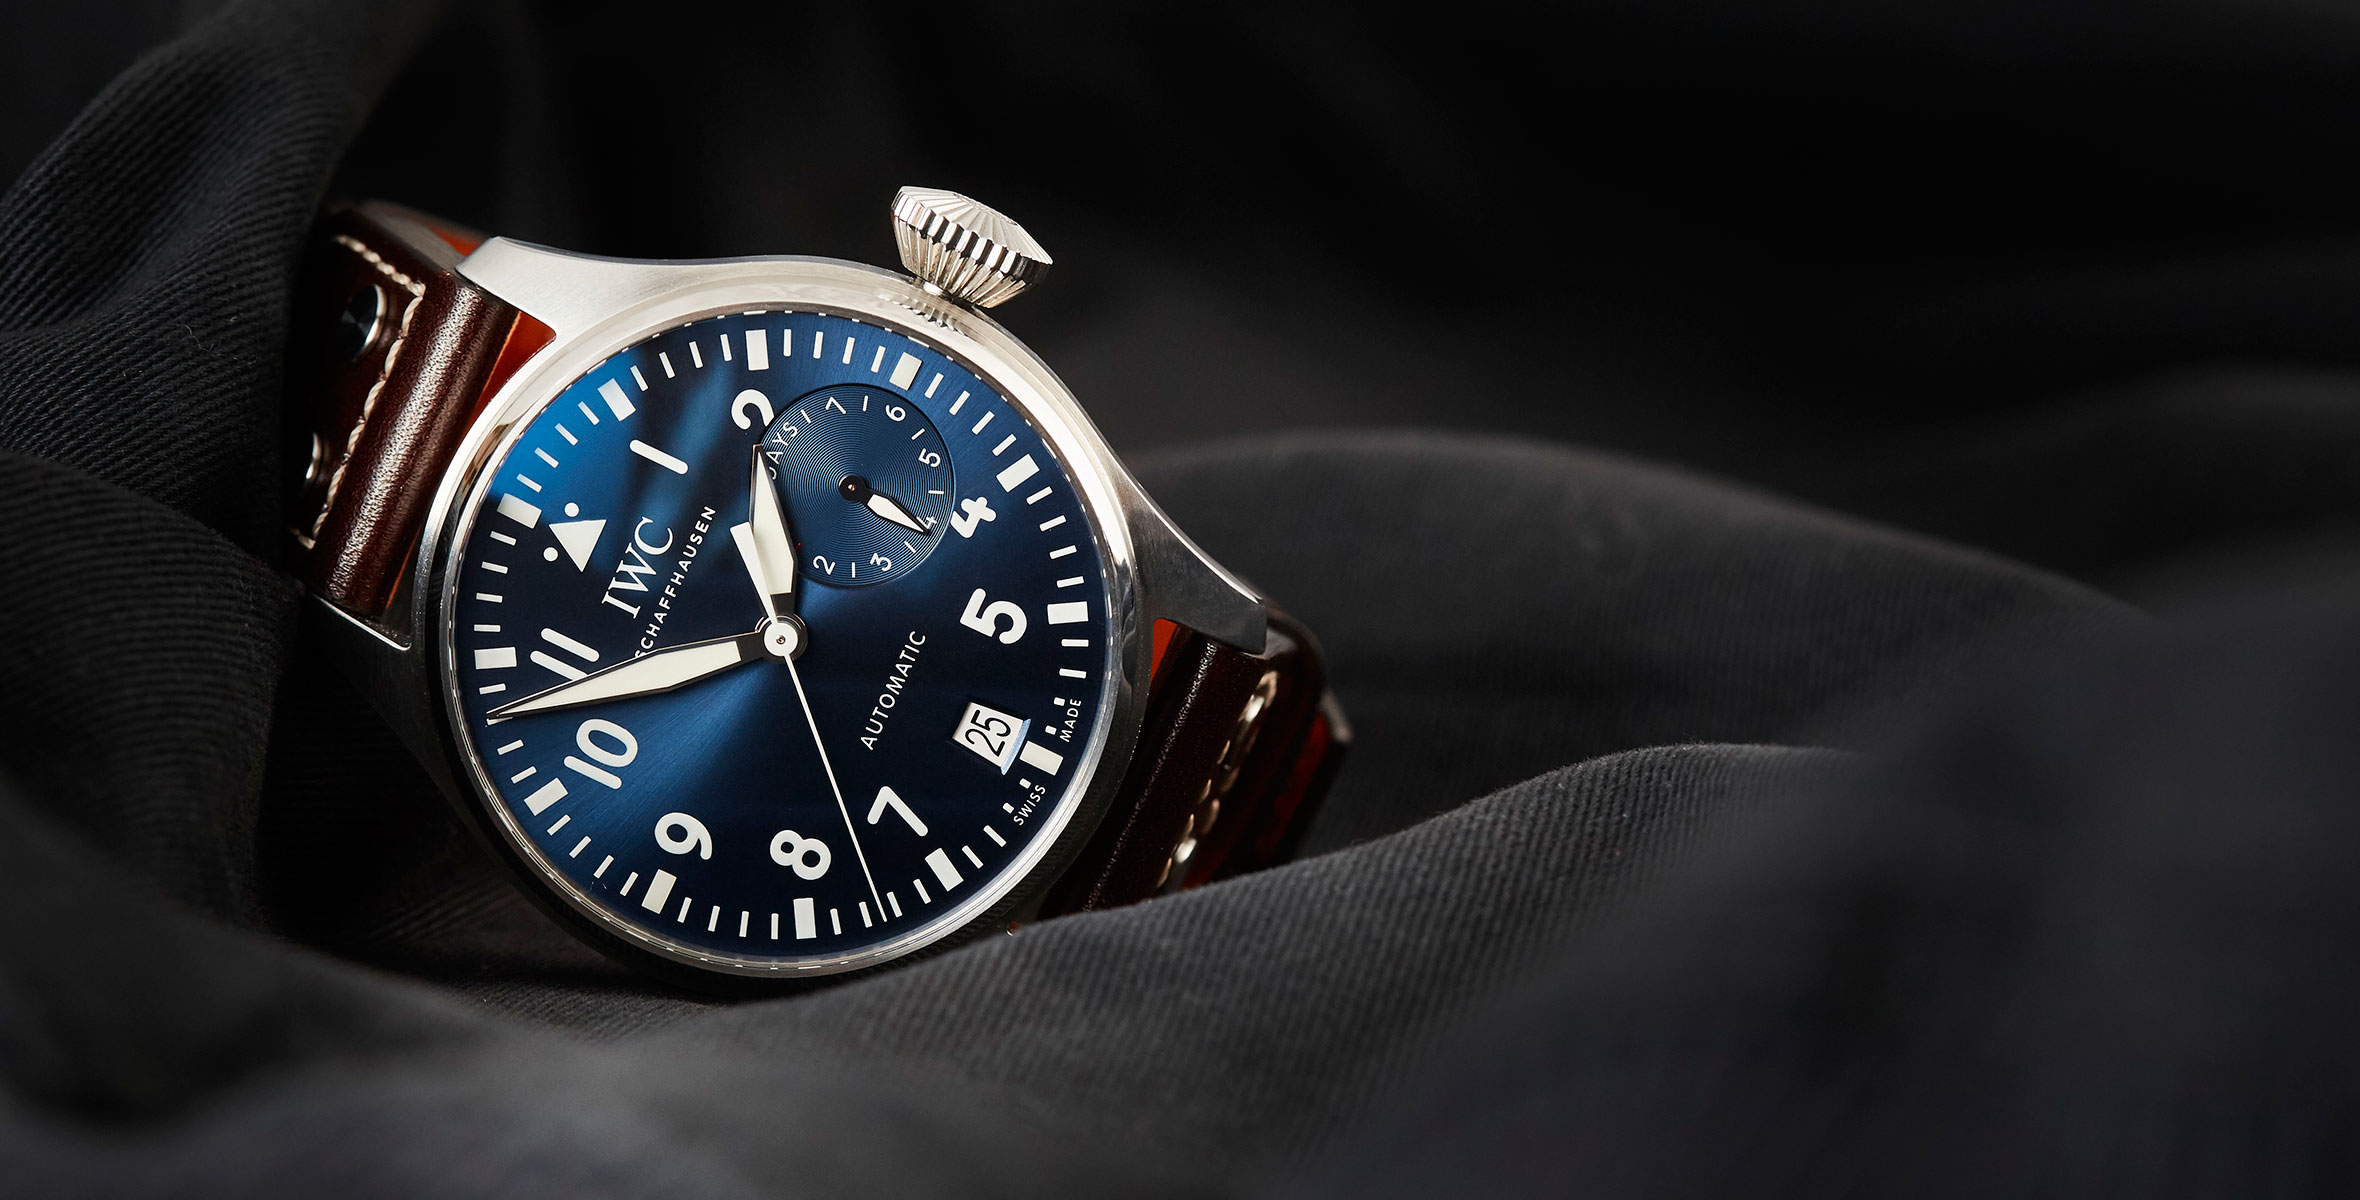 Hands-on With the 2016 IWC Big Pilot Edition “Le Petit Prince”